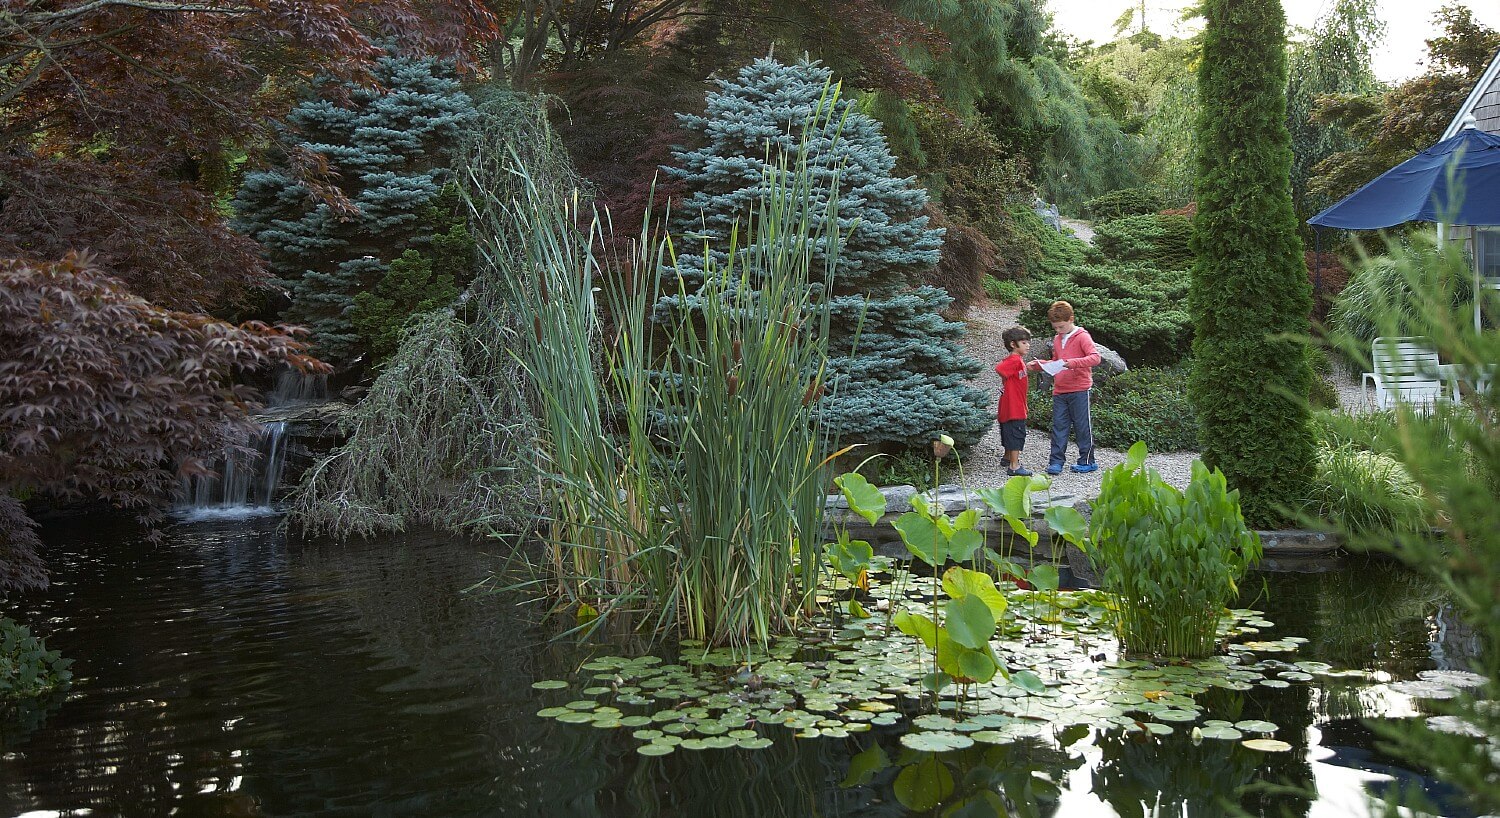 Small pond with water lilies surrounded by tall trees, next to an outdoor patio with two small children